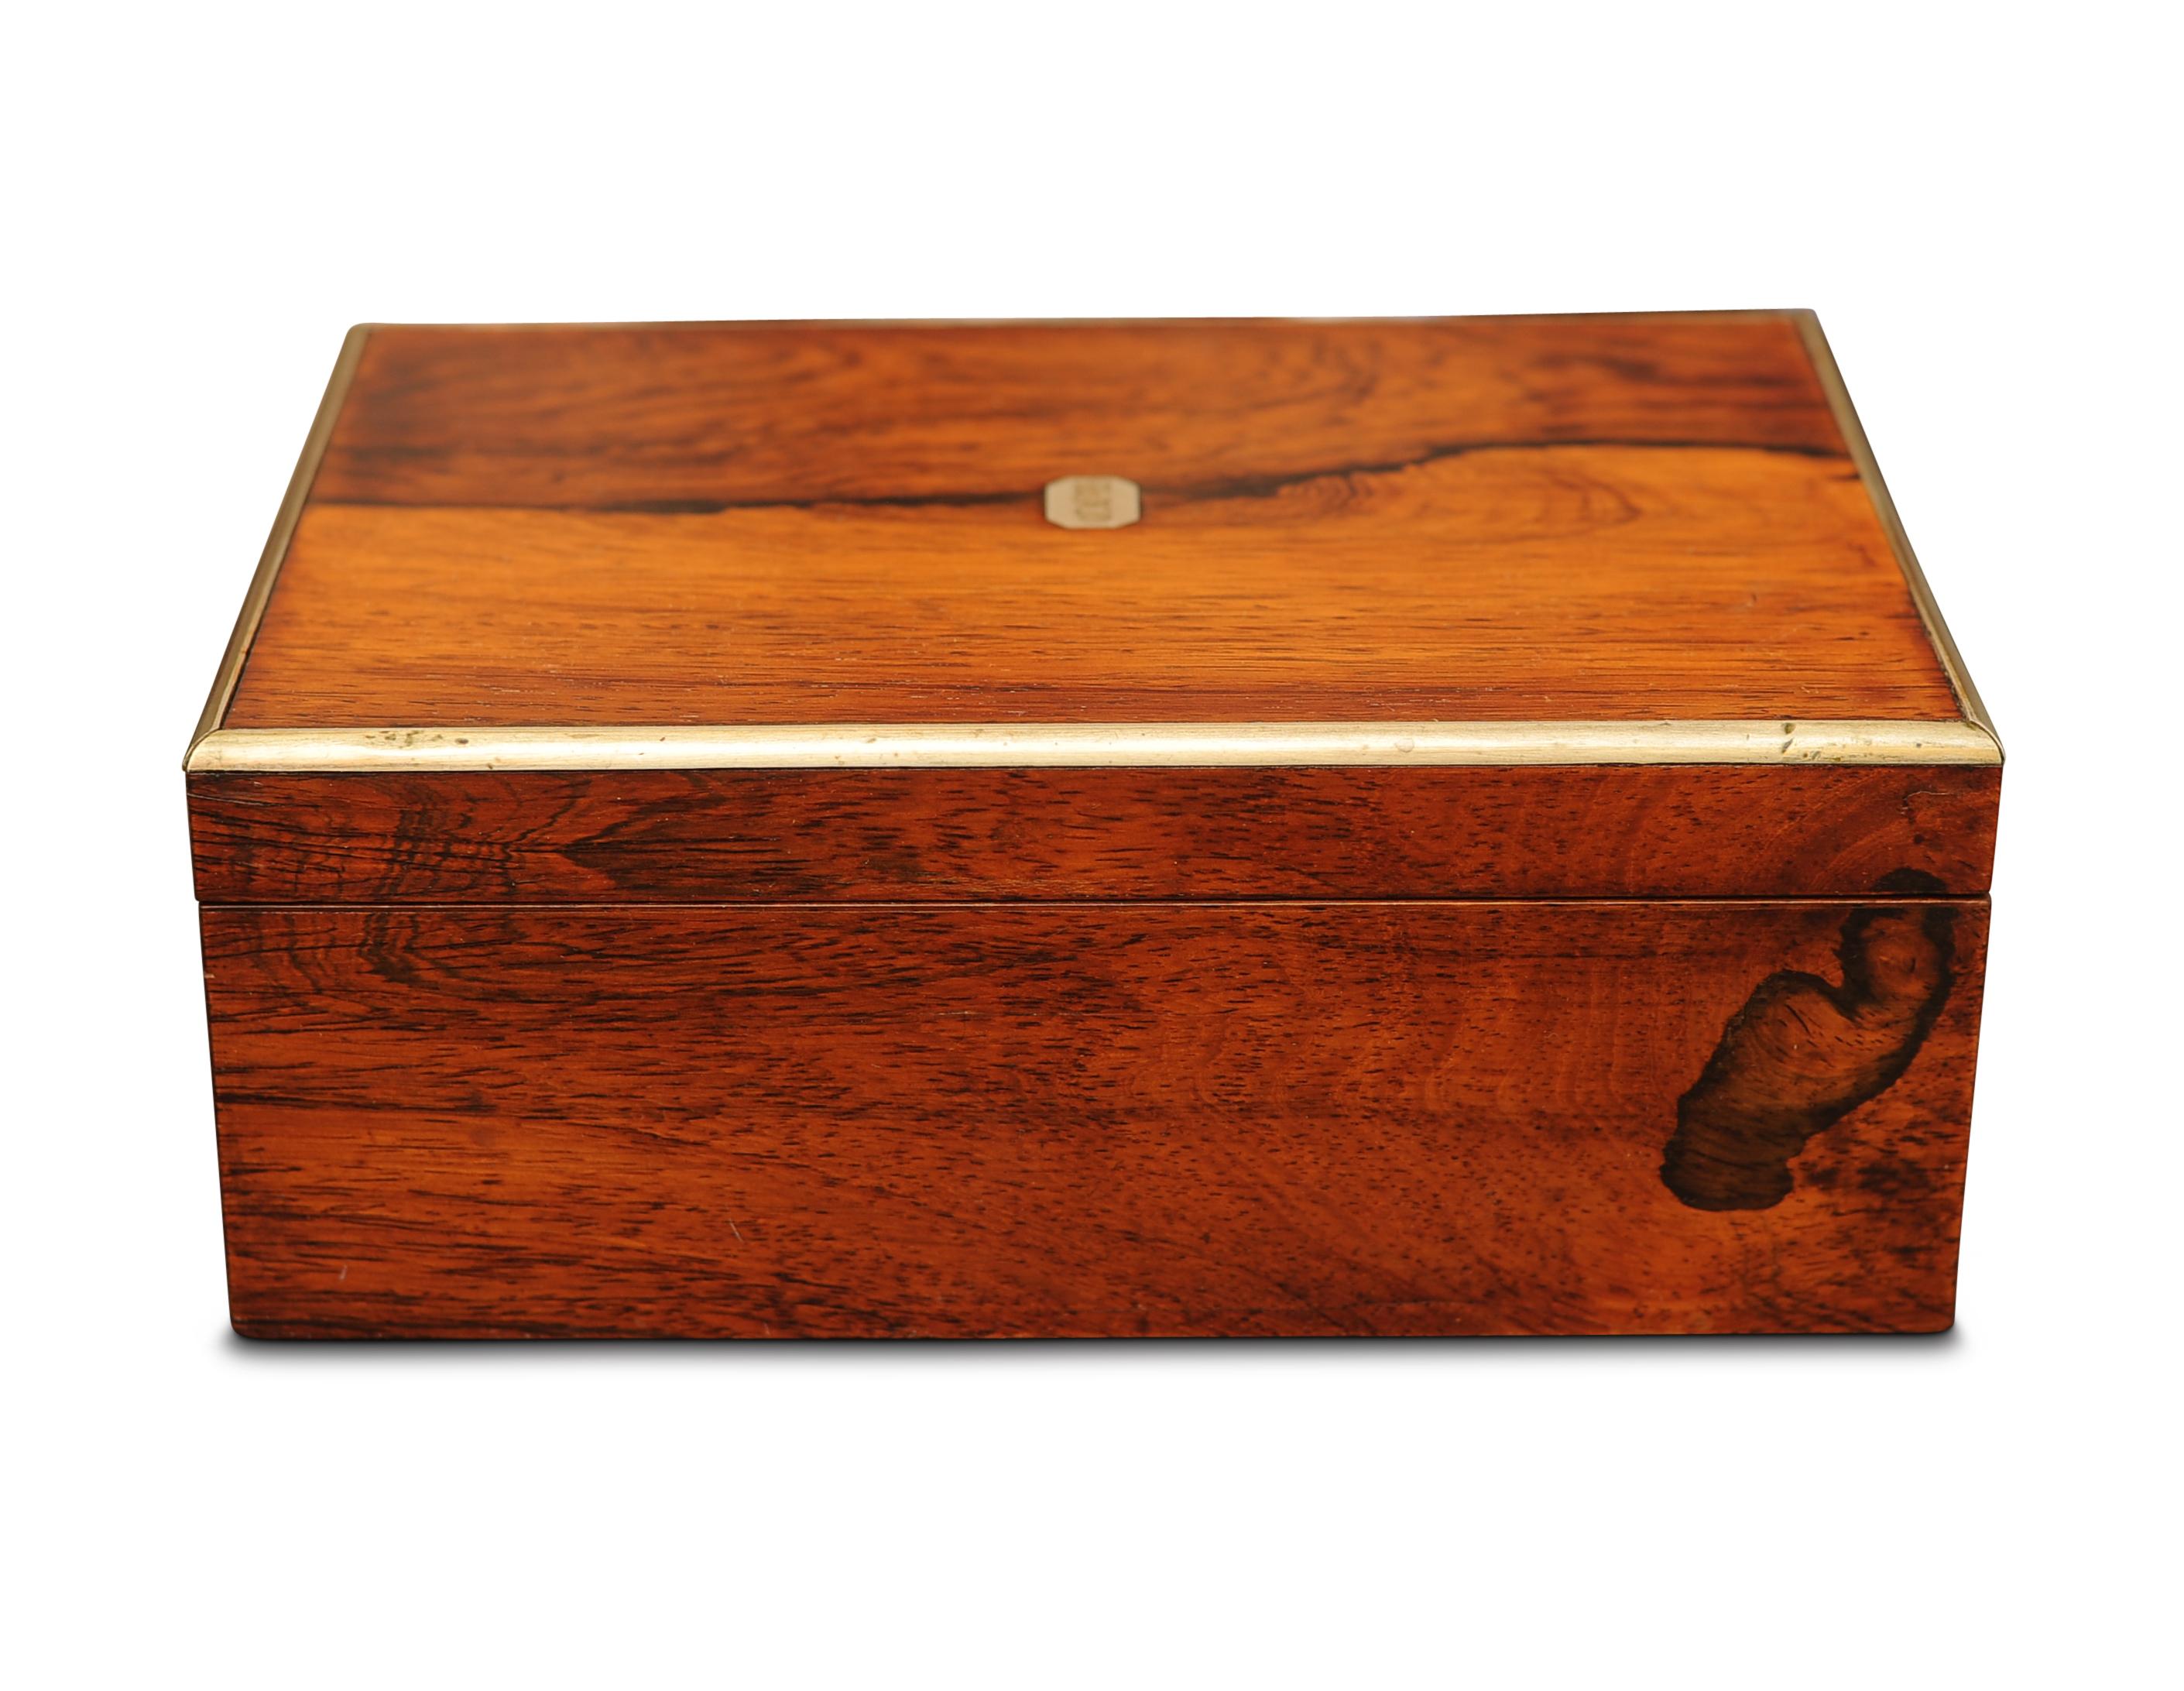 19th Century Rosewood and Brass Bound Grooming Box With Internal Mirror In Good Condition For Sale In High Wycombe, GB